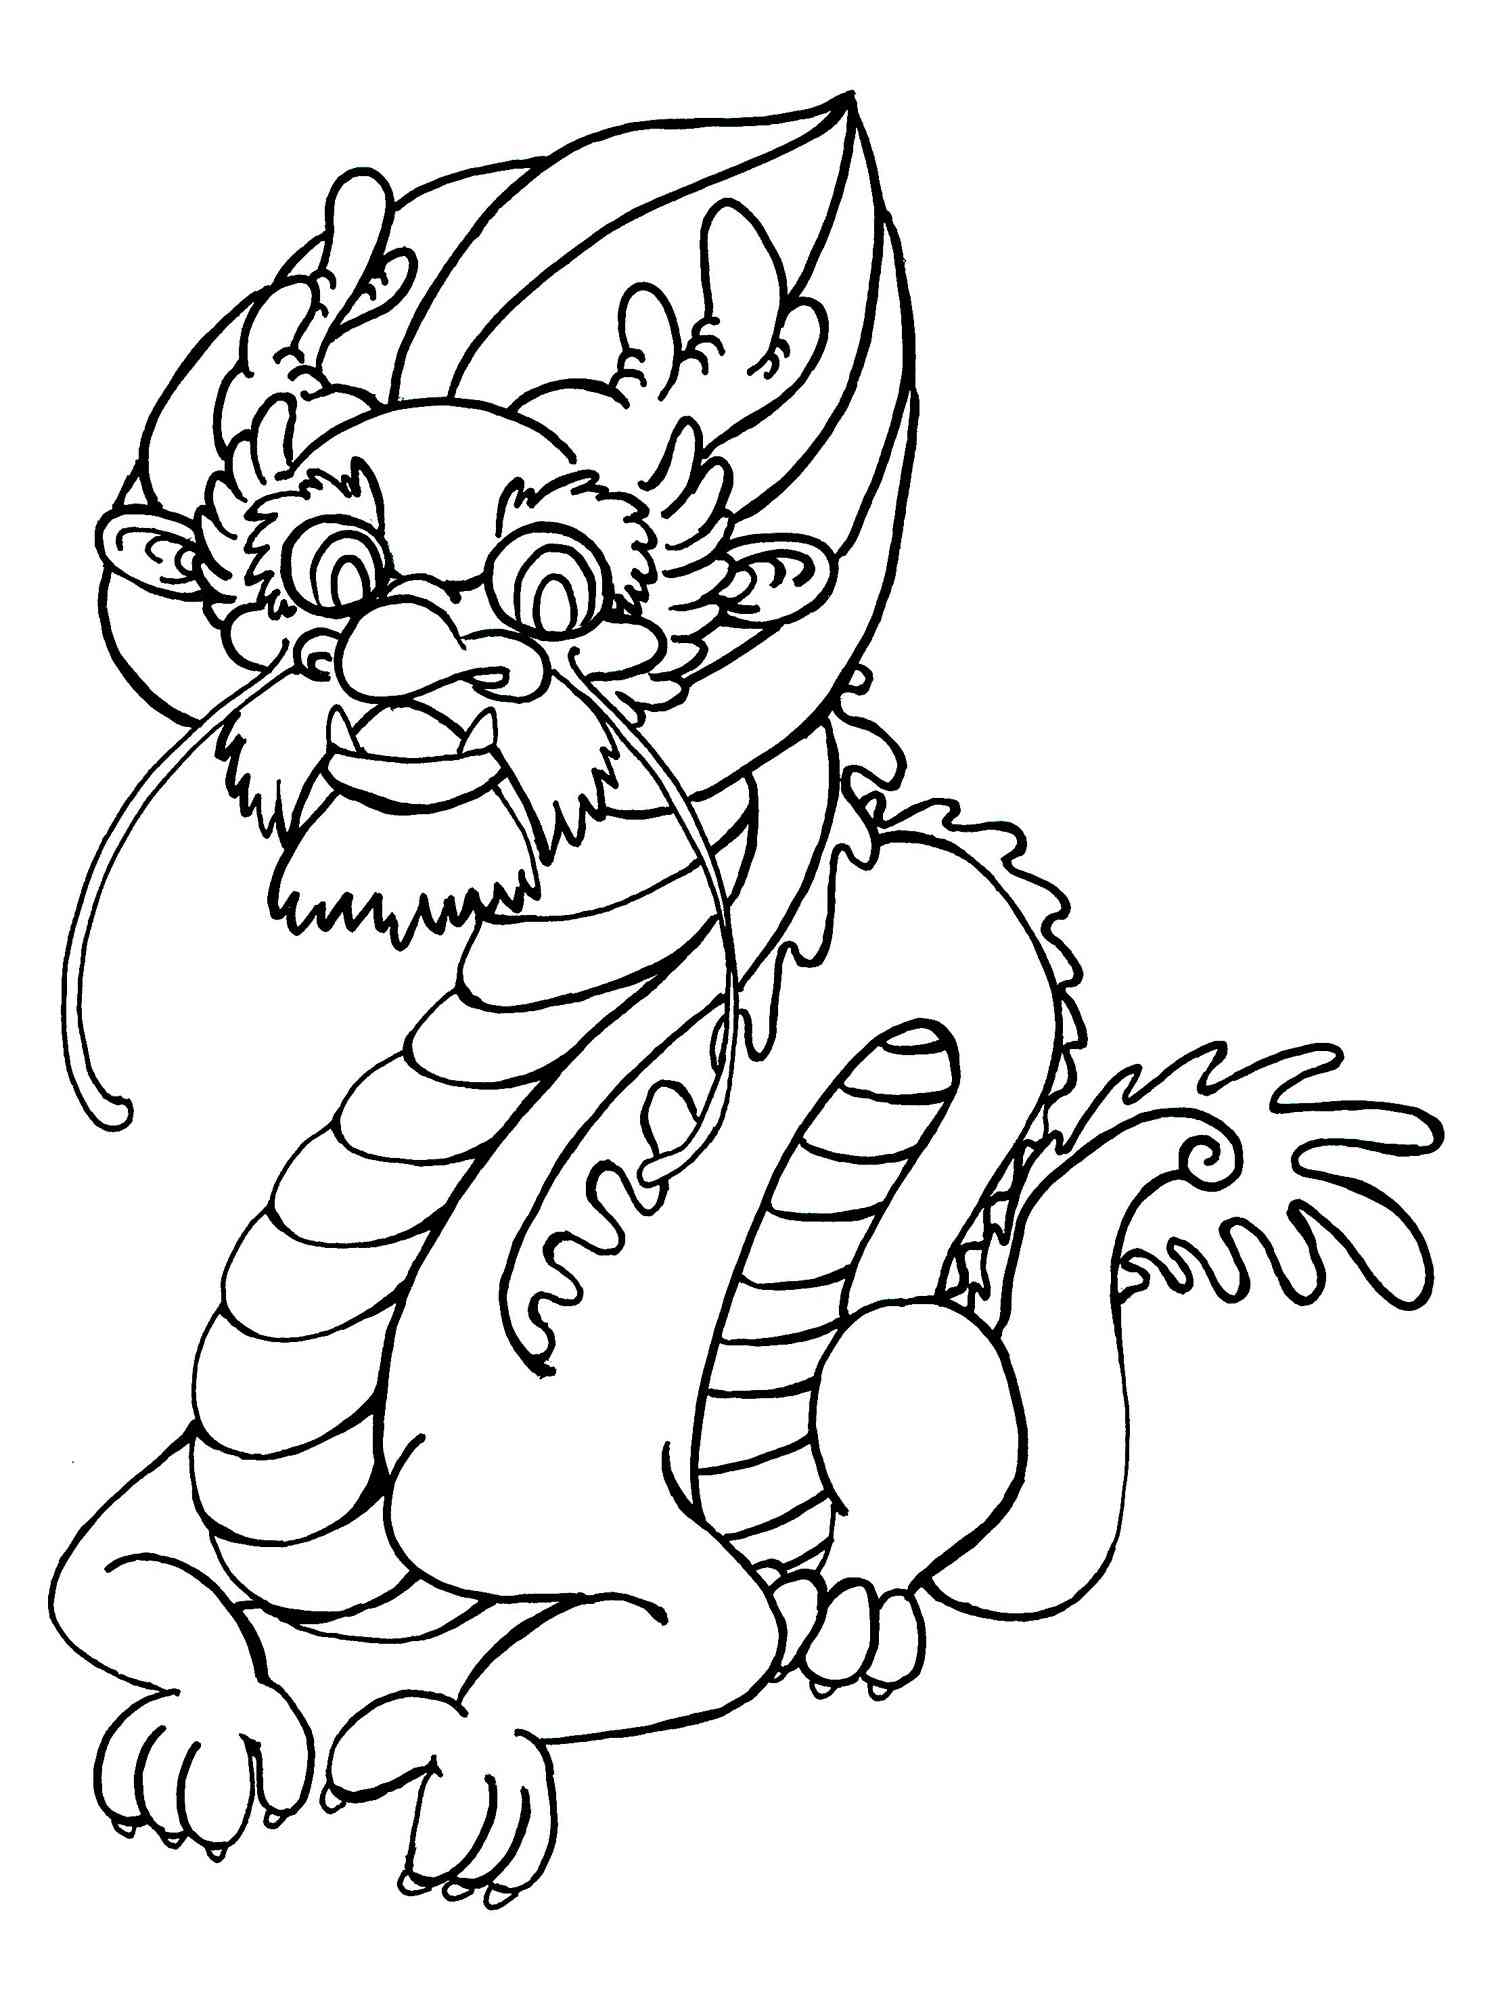 Funny Chinese Dragon coloring page